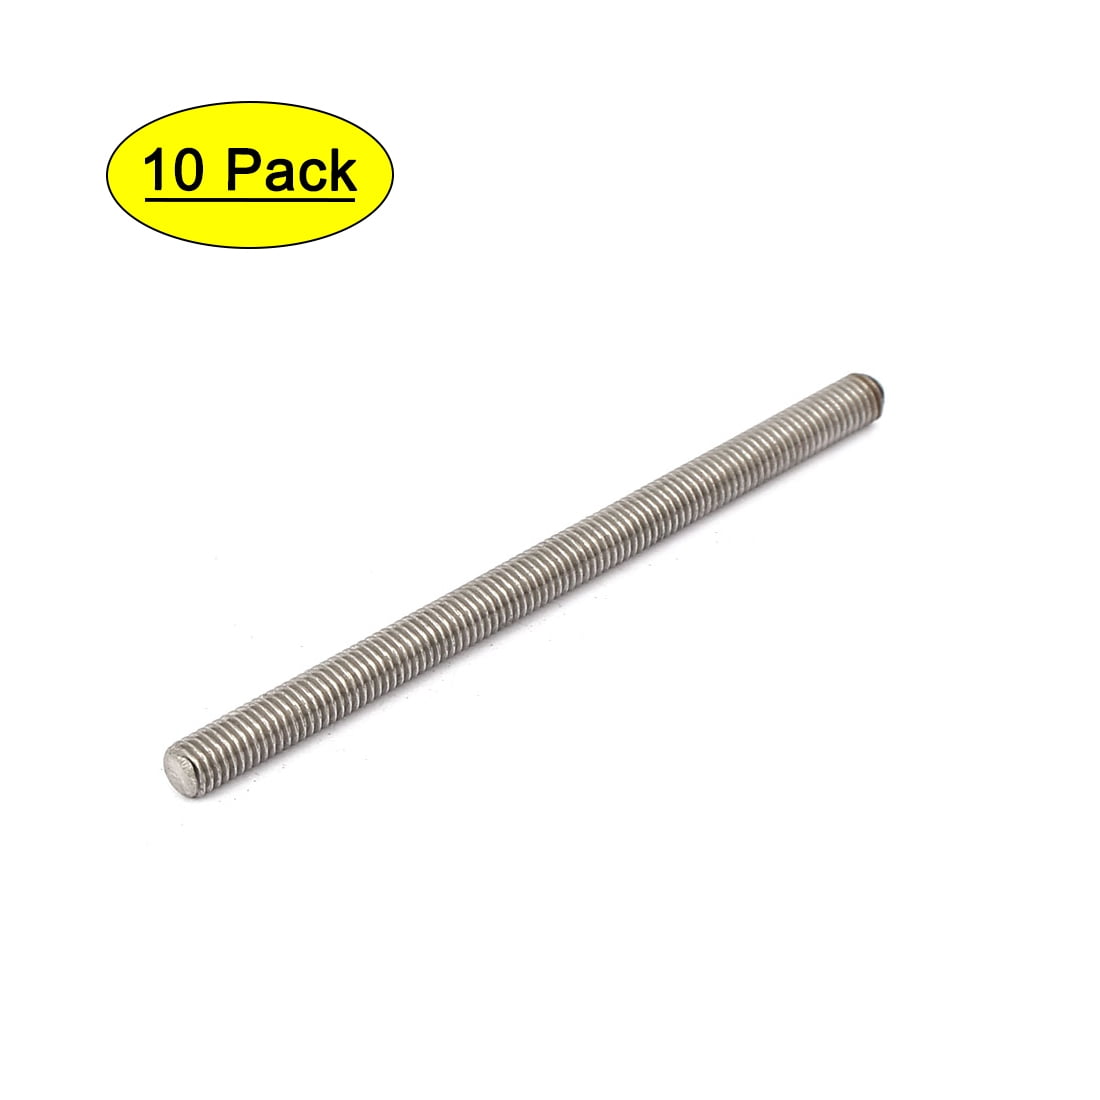 Studding/metric includes 10 nuts and washers M2 Steel Threaded Rod 12" length